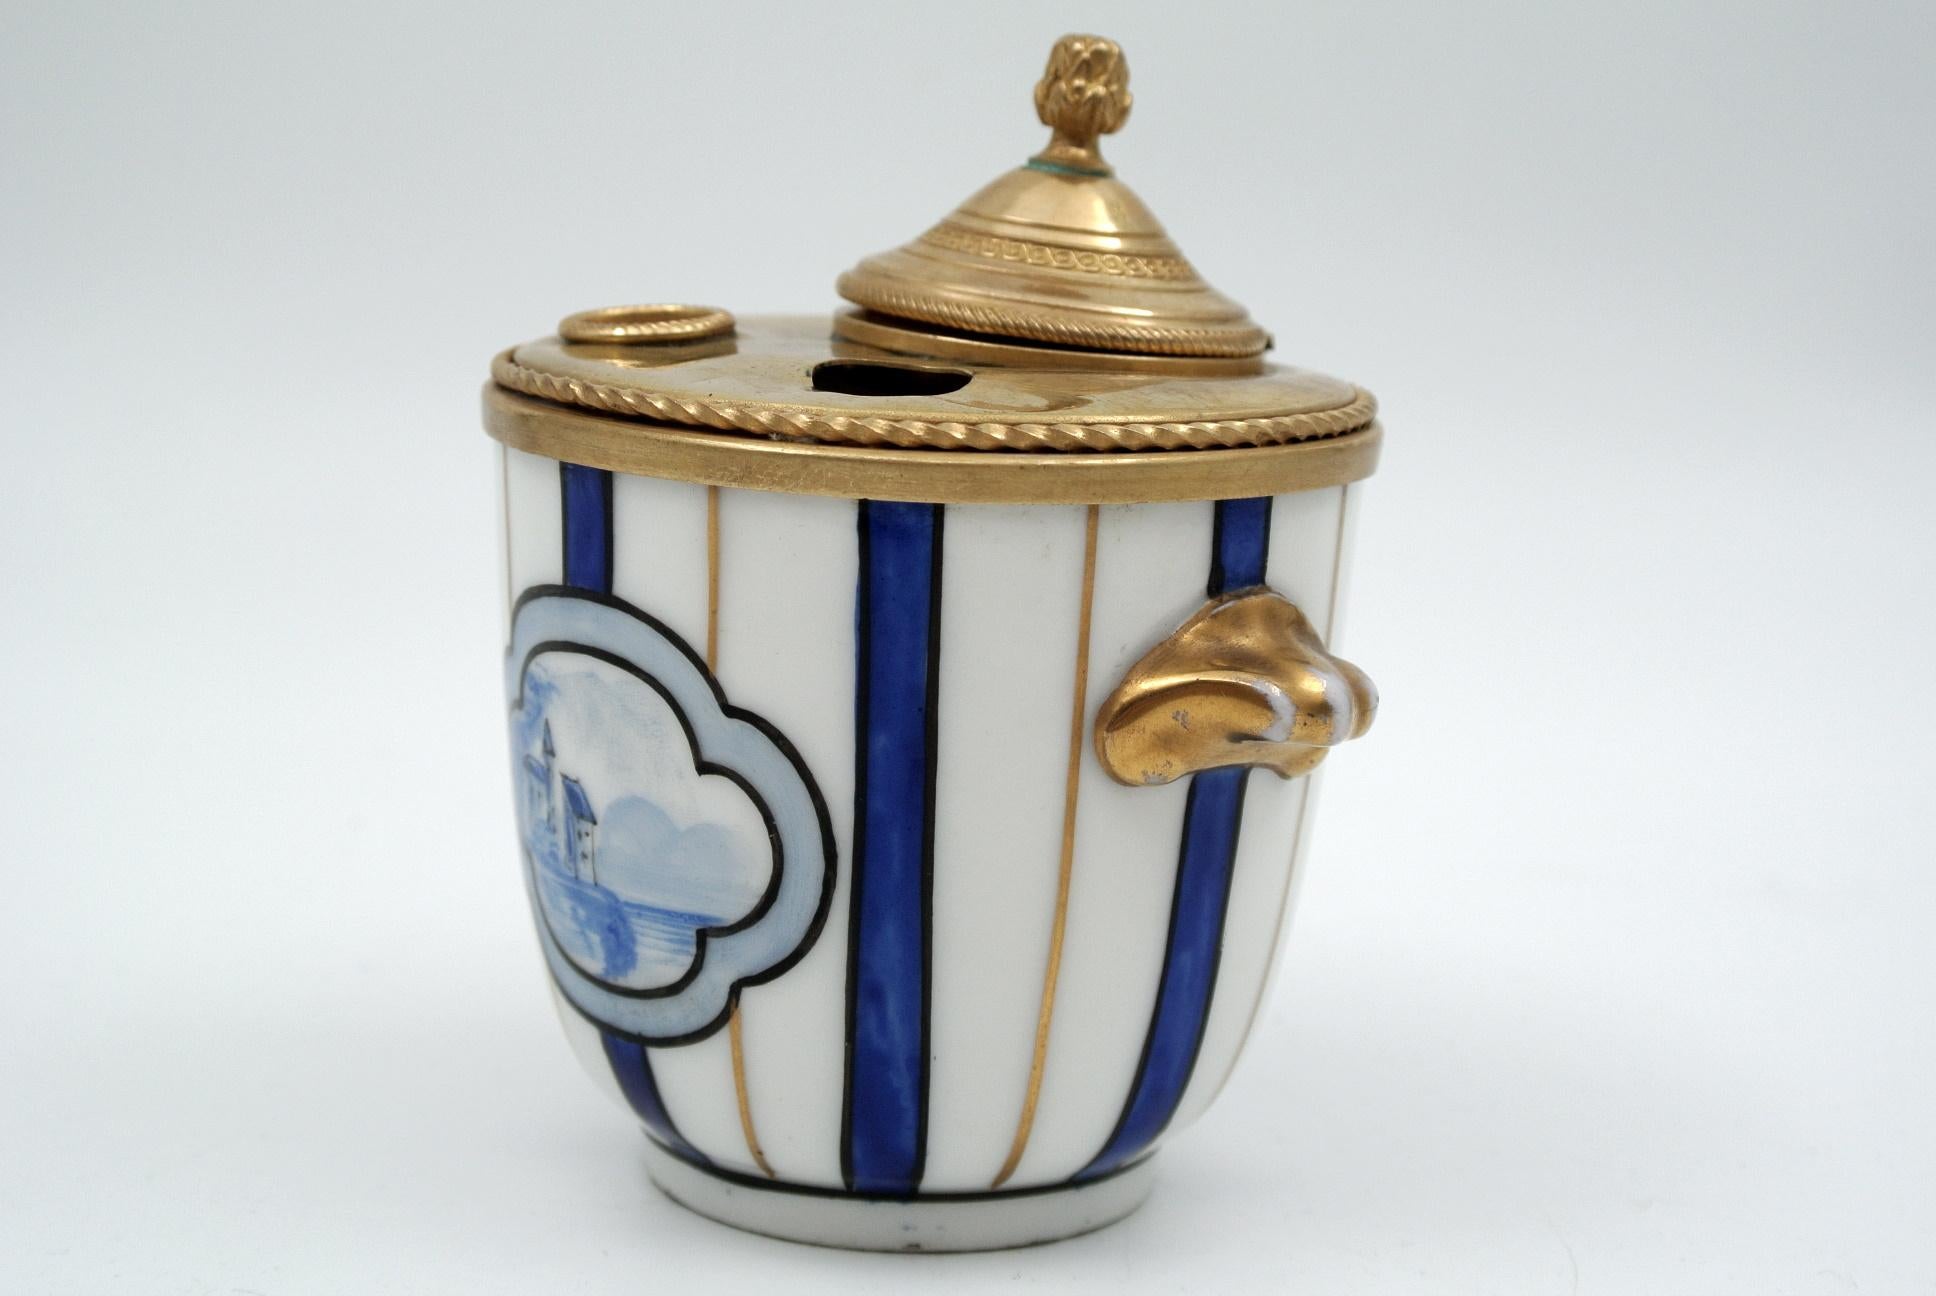 Inkwell in gilded brass and porcelain, 19th century, Napoleon III period.
Measures: H 10 cm, D 8 cm.